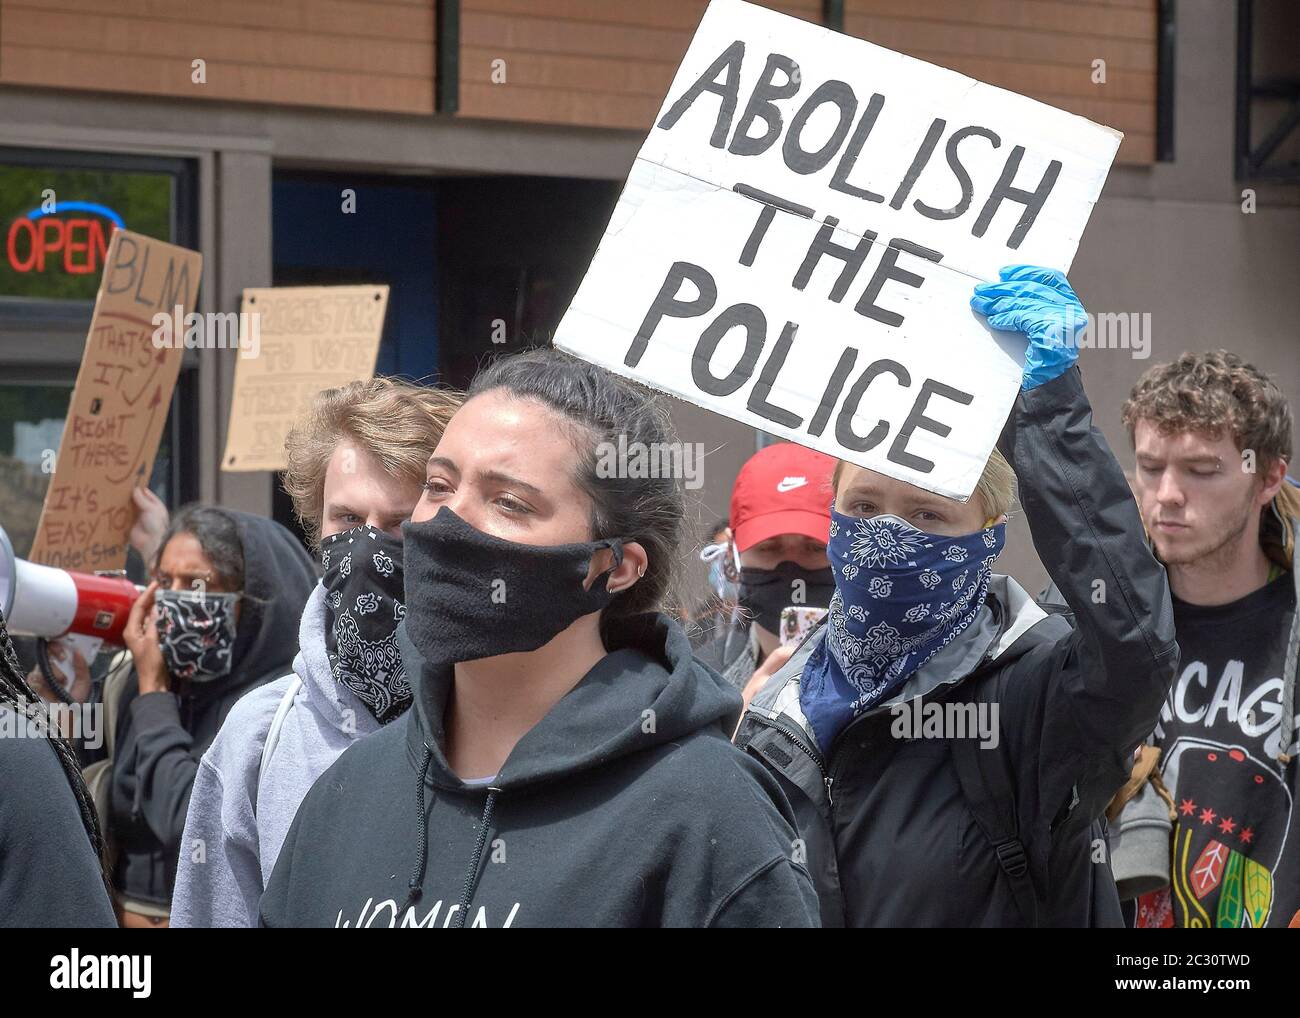 Many carrying signs, people march along a street during a June 7, 2020, Black Lives Matter protest in Eugene, Oregon. Stock Photo